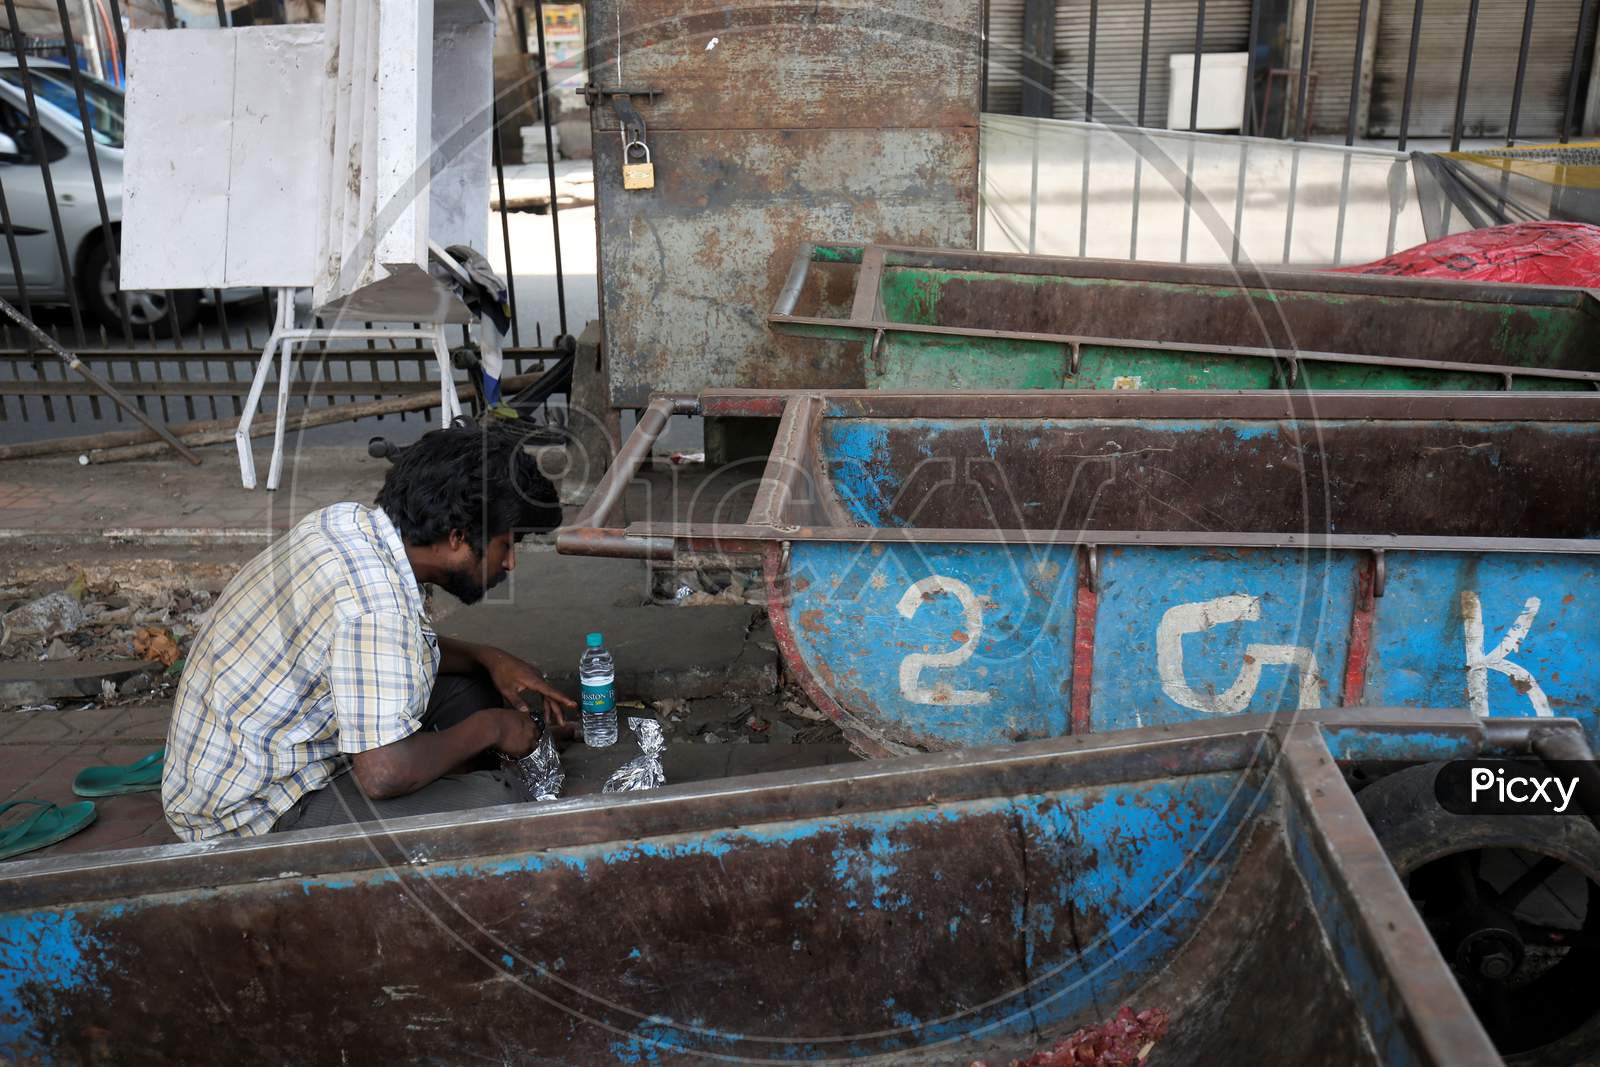 A homeless man eats his food next to pushcarts in a market during the nationwide lockdown to stop the spread of Coronavirus (COVID-19) in Bangalore, India, May 01, 2020.